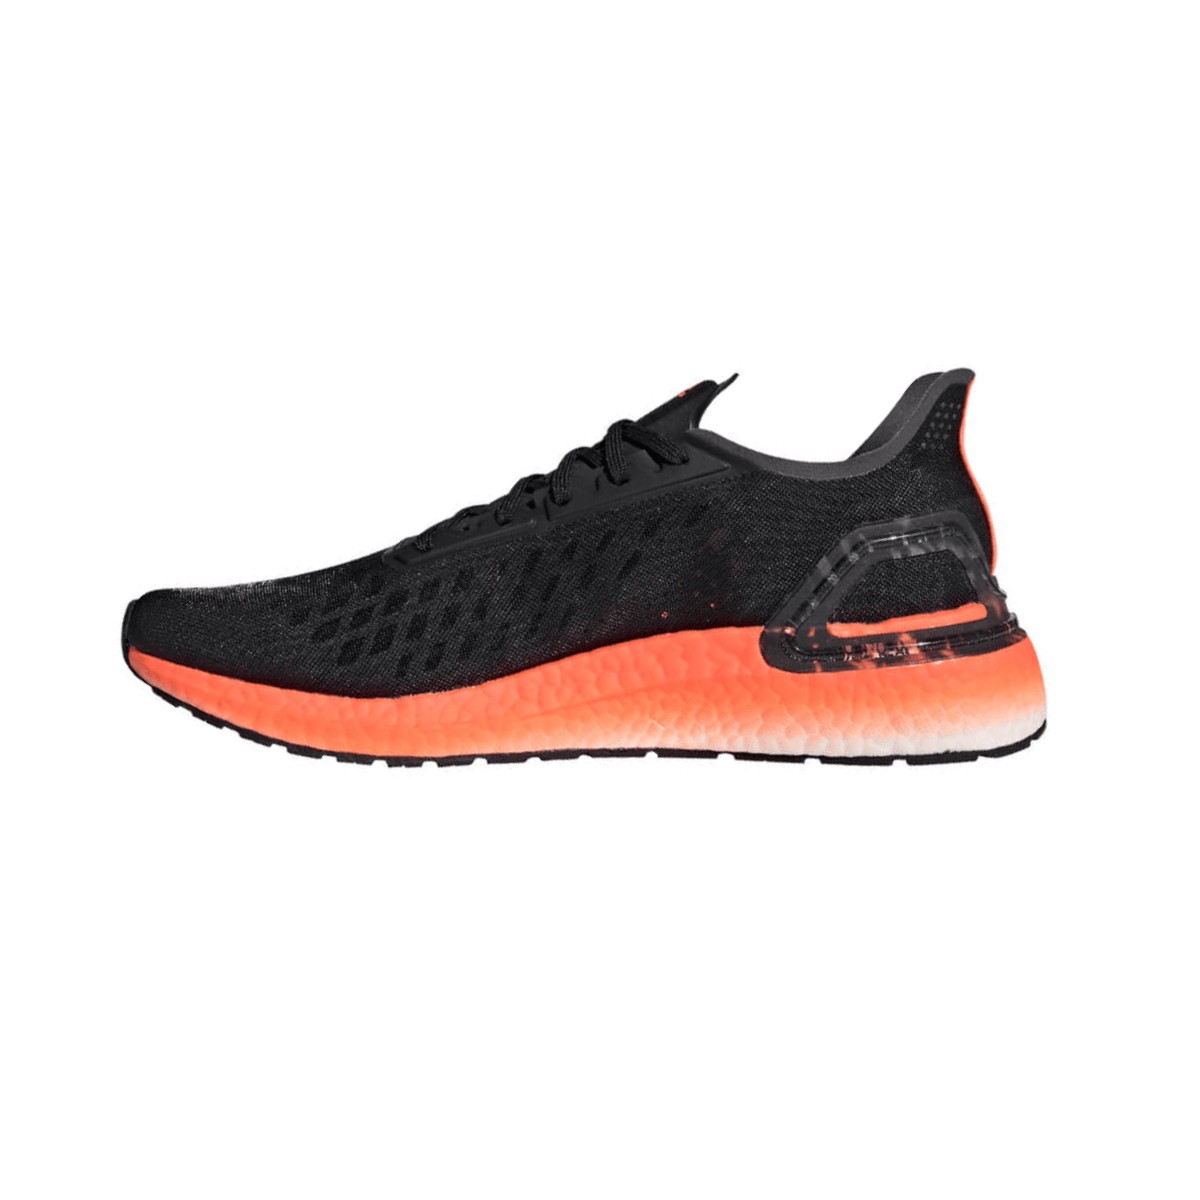 Adidas Ultra Boost Black PV20 Women's Shoes